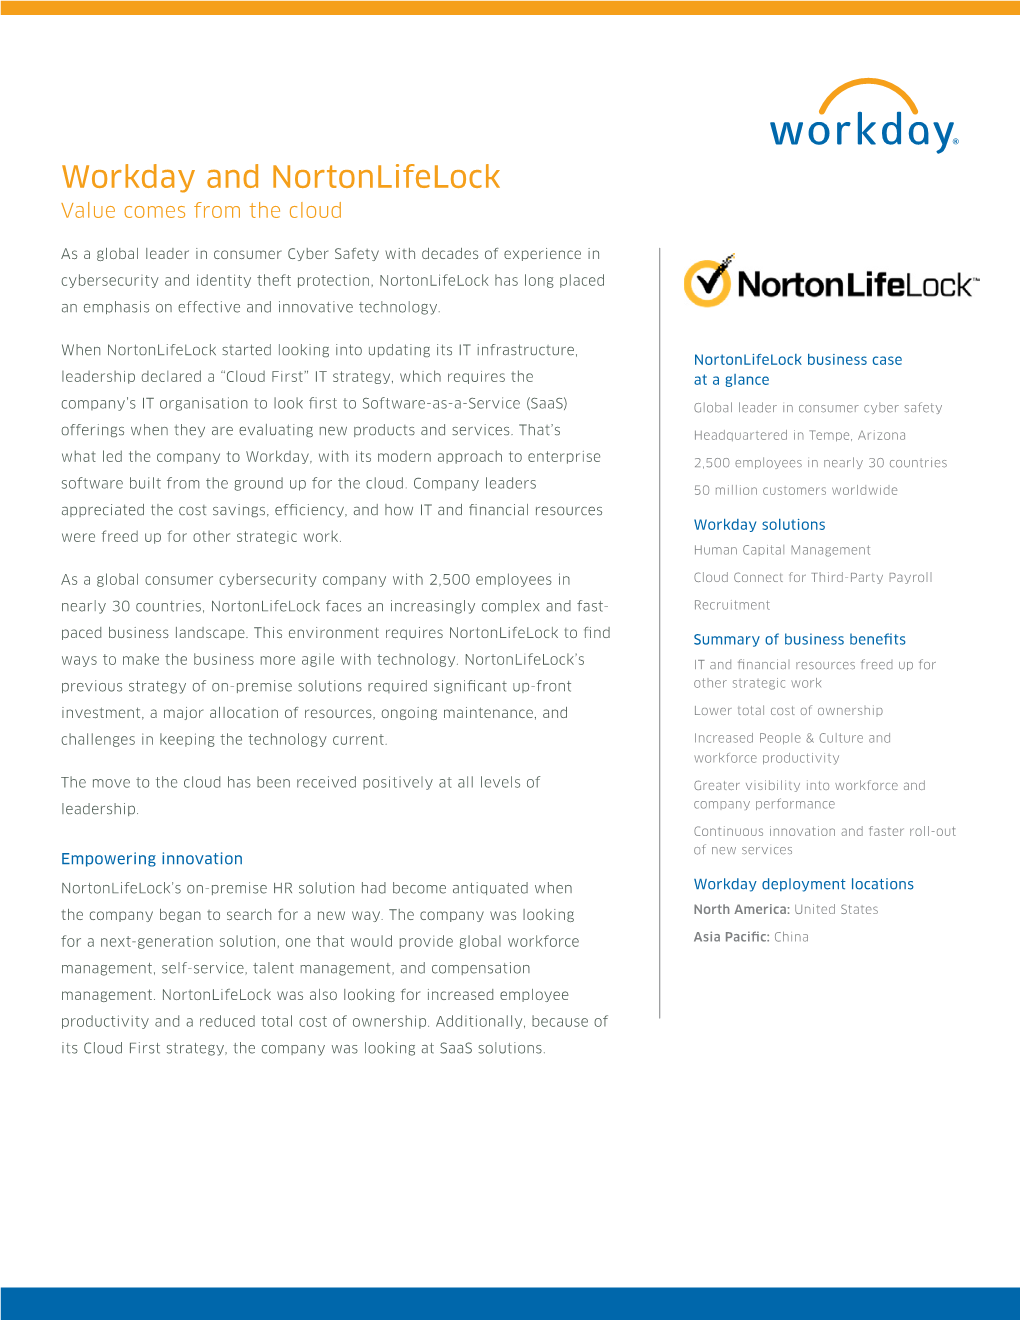 Workday and Nortonlifelock Value Comes from the Cloud